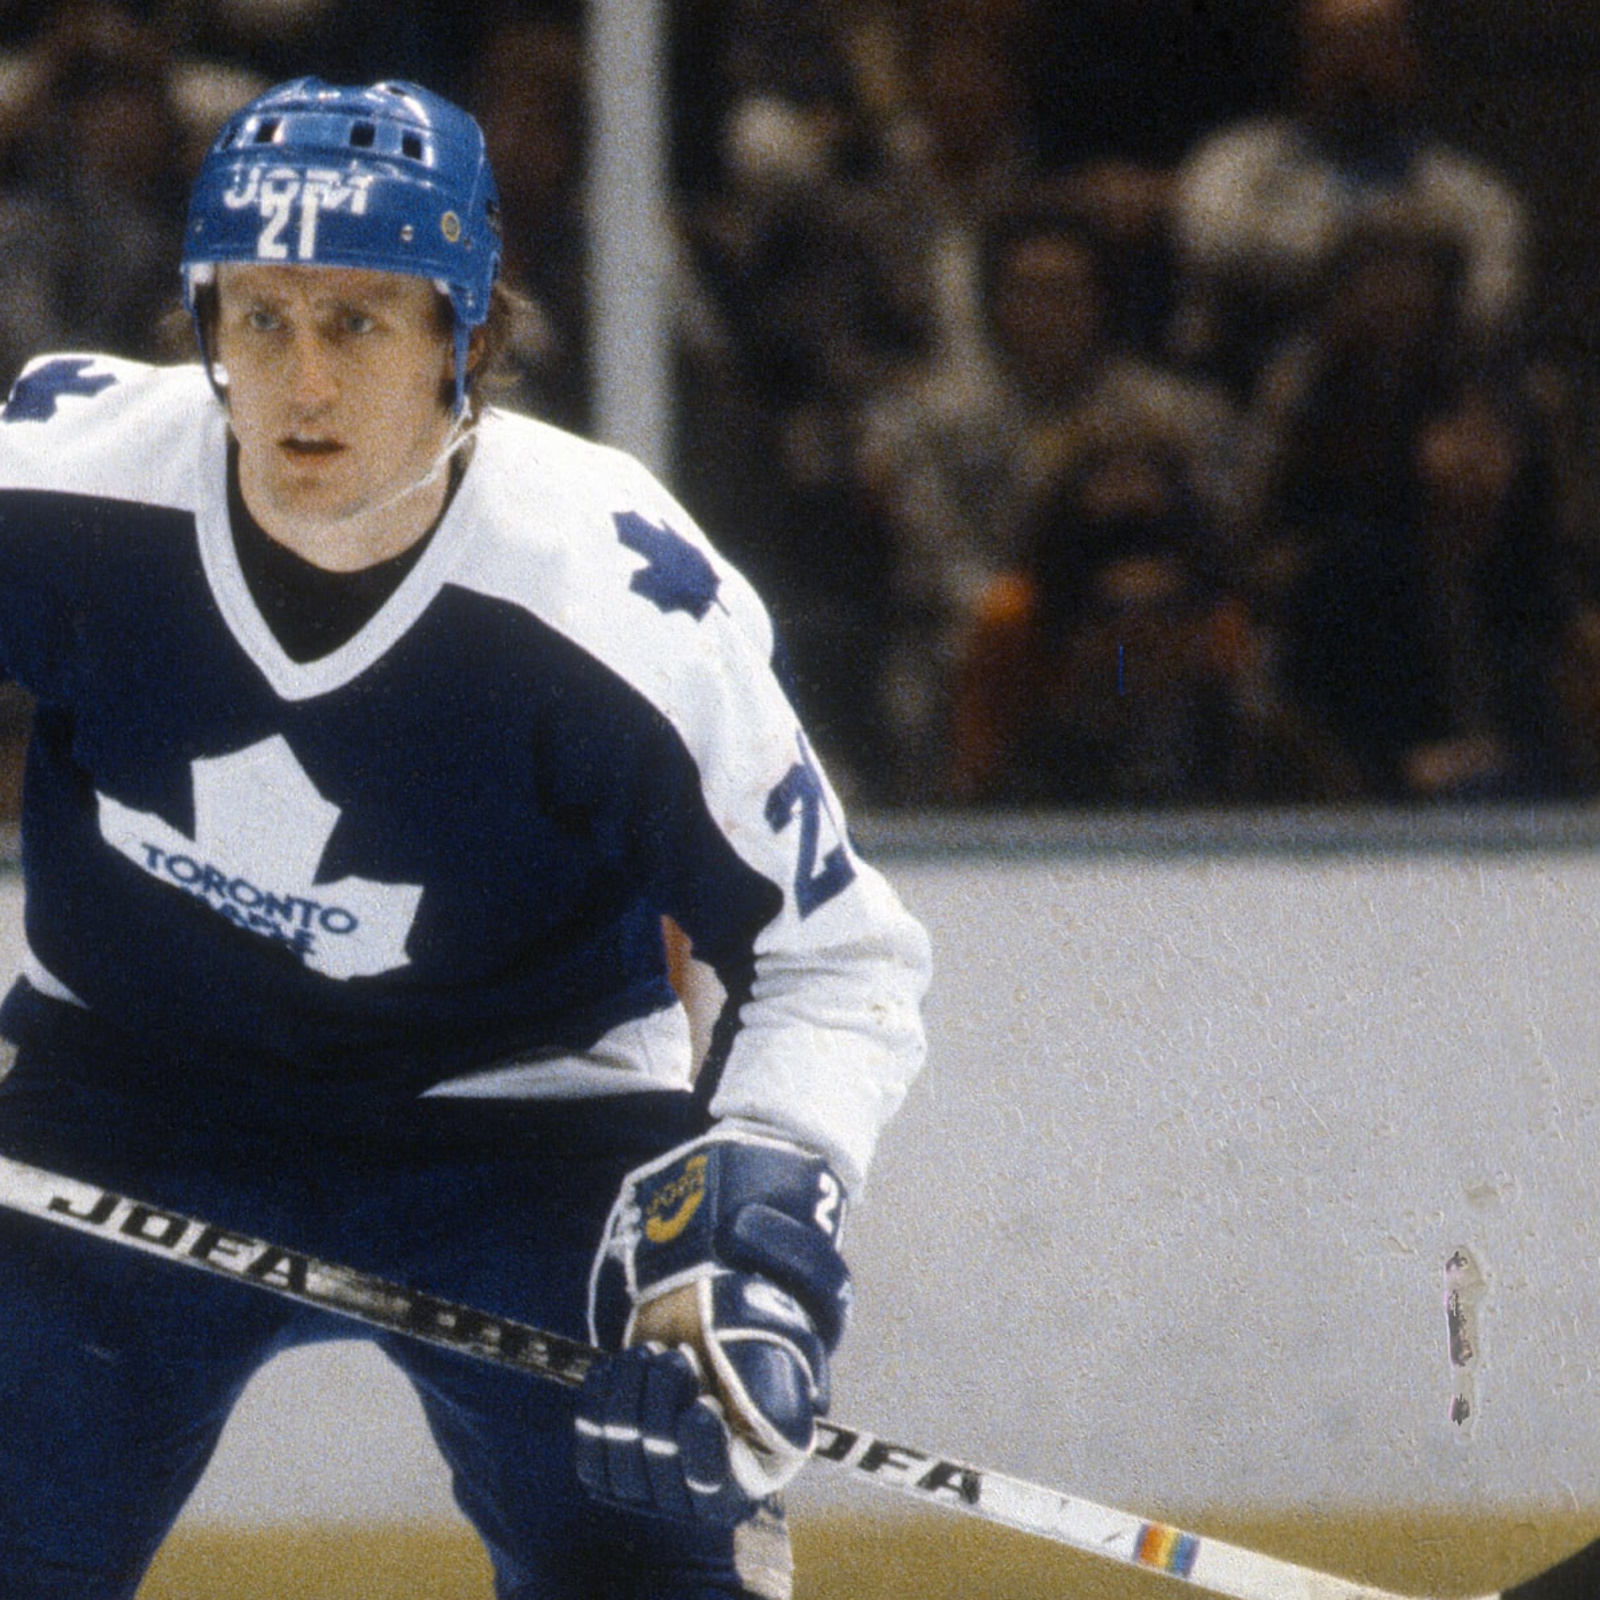 Leafs legend Börje Salming diagnosed with ALS